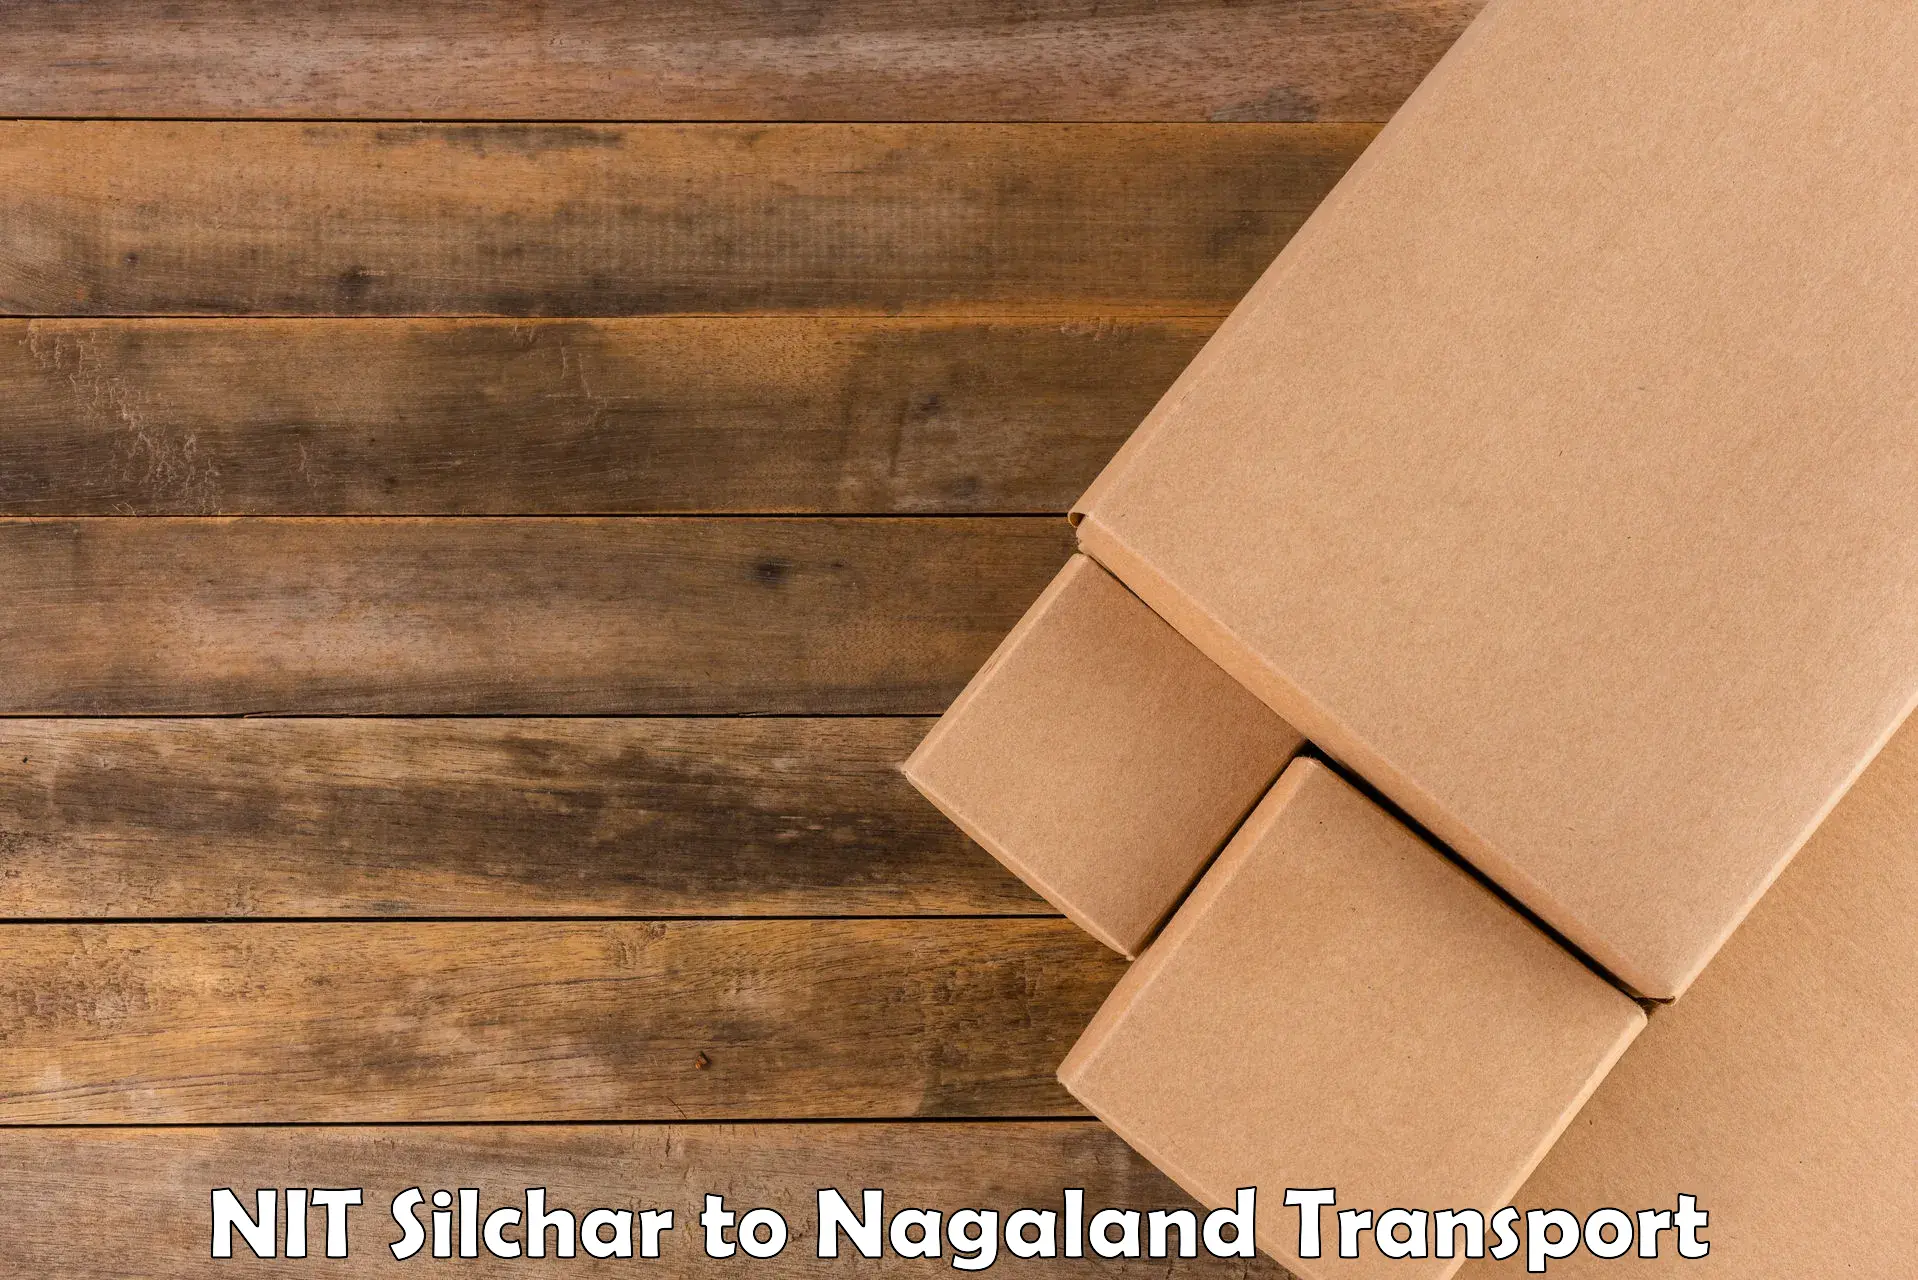 Cycle transportation service NIT Silchar to Peren